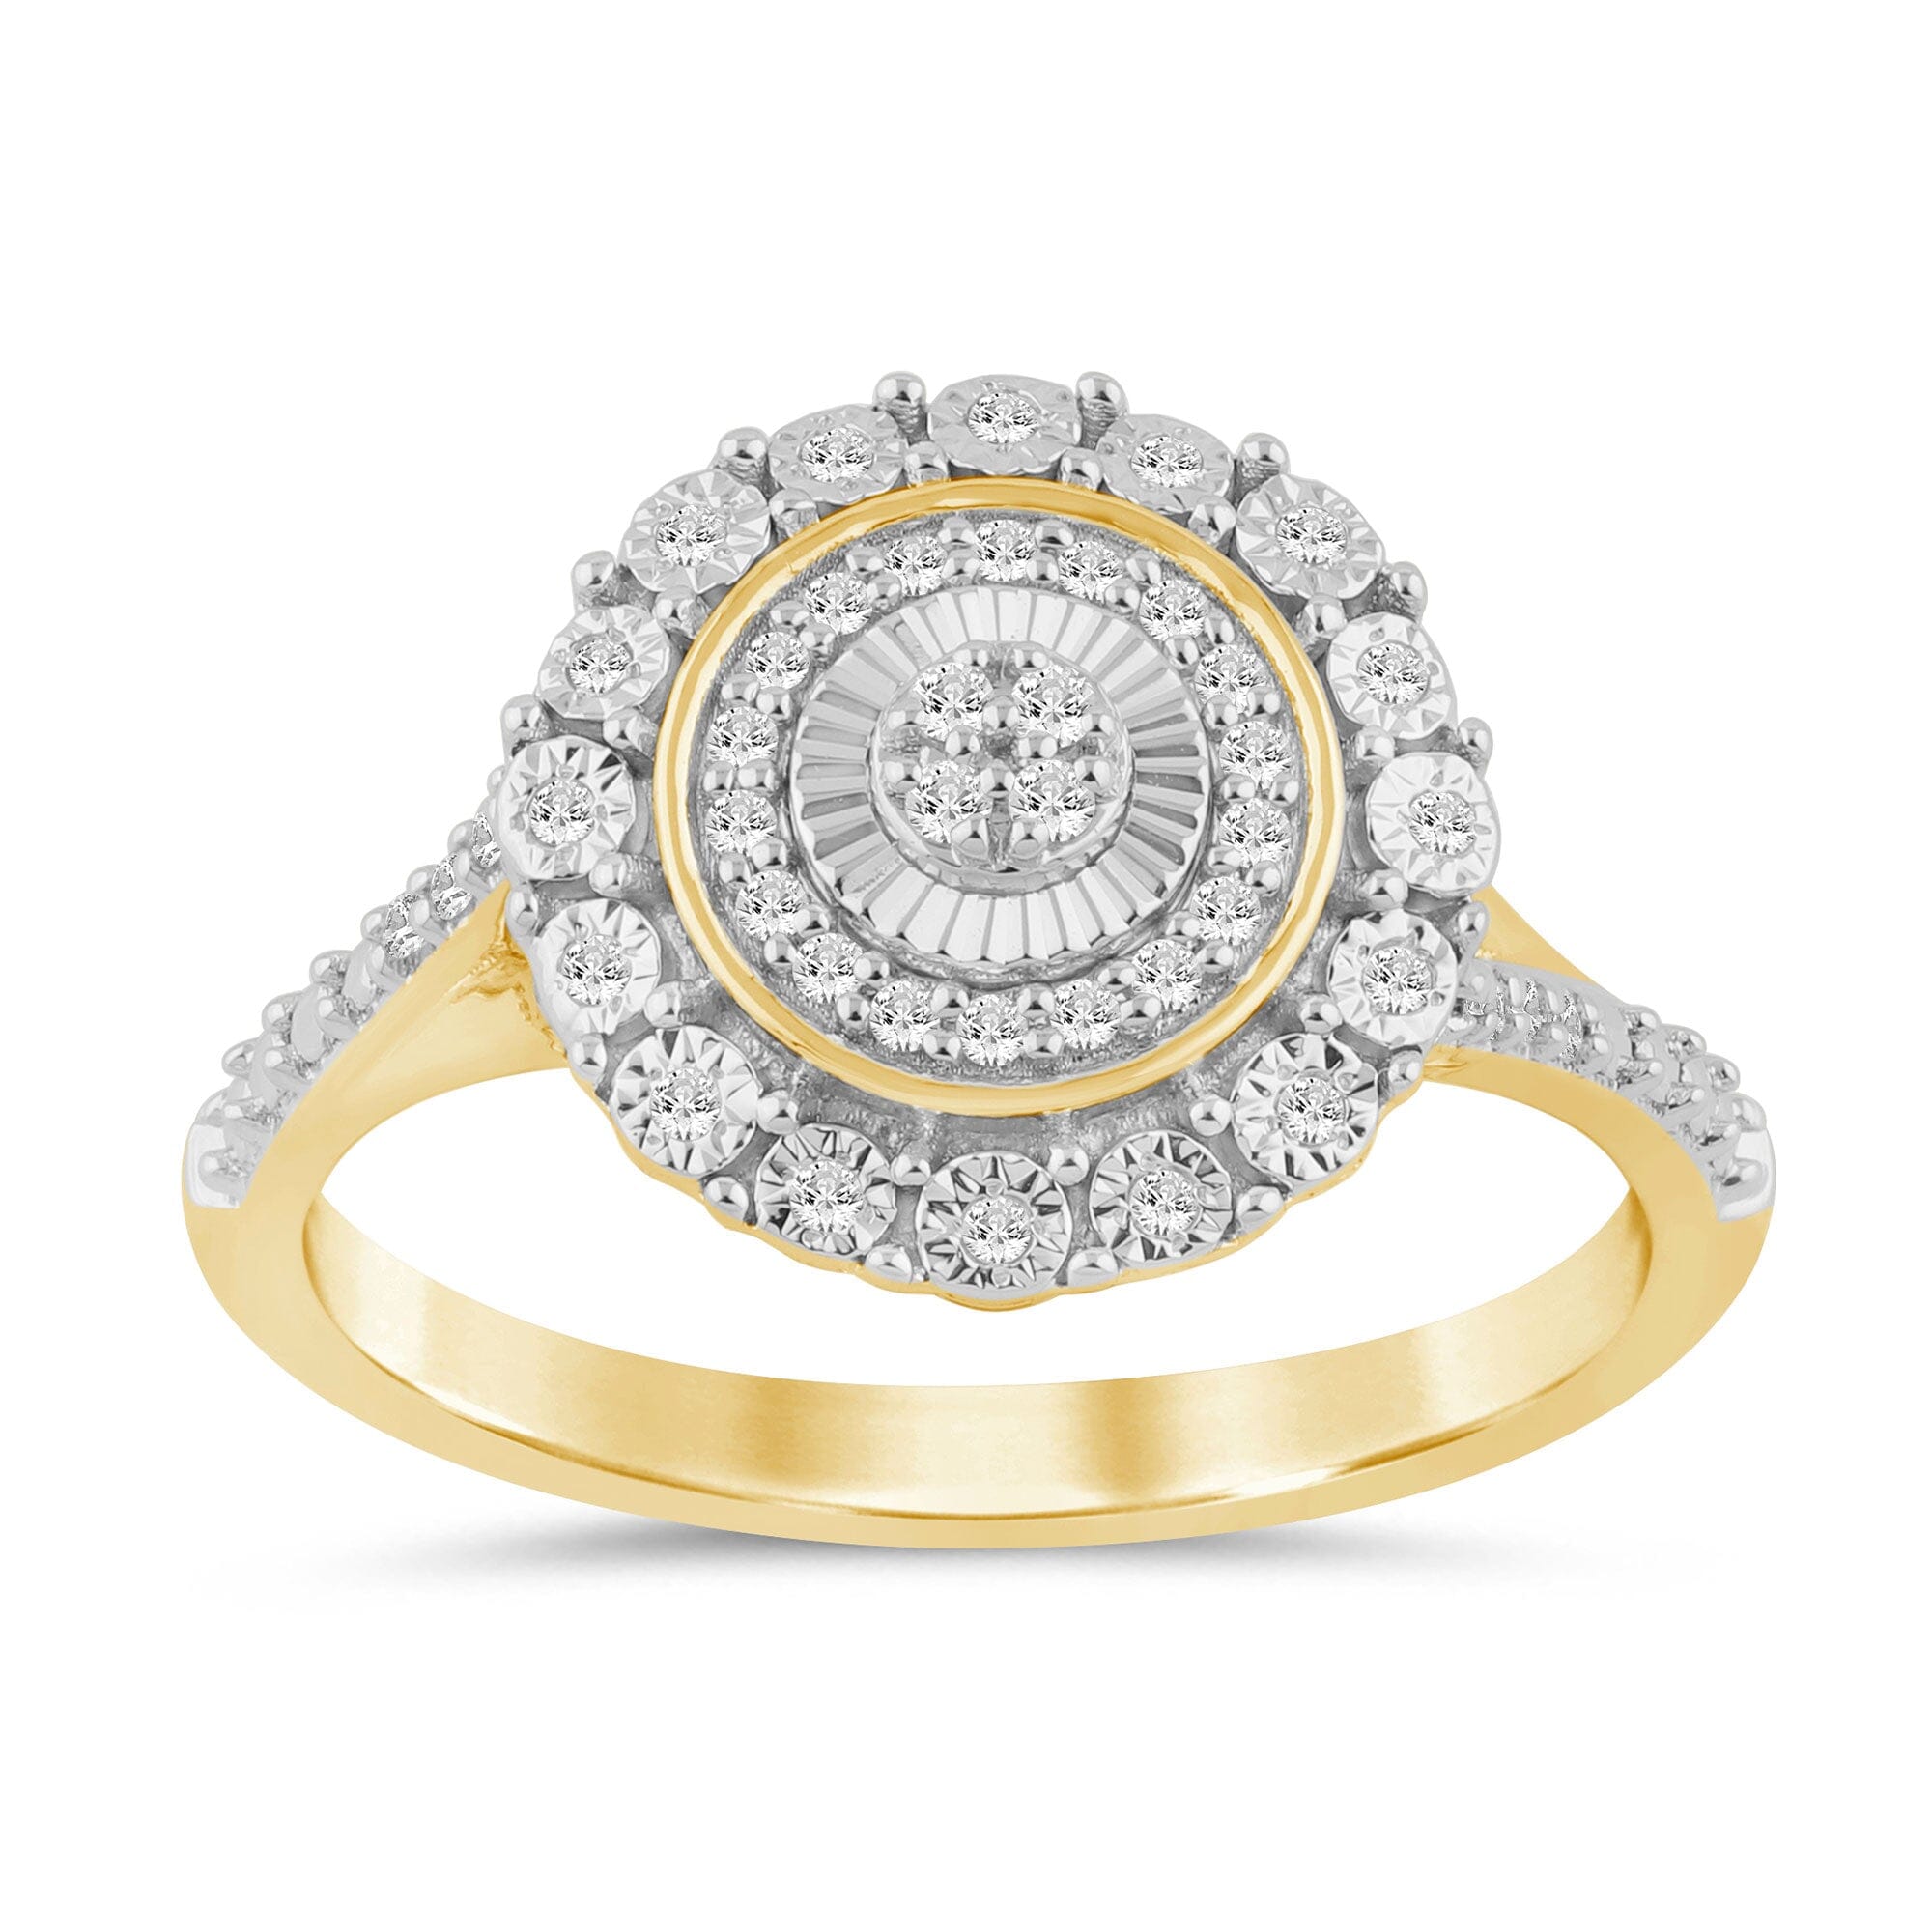 Halo Bezel Ring with 0.15ct of Diamonds in 9ct Yellow Gold Rings Bevilles 